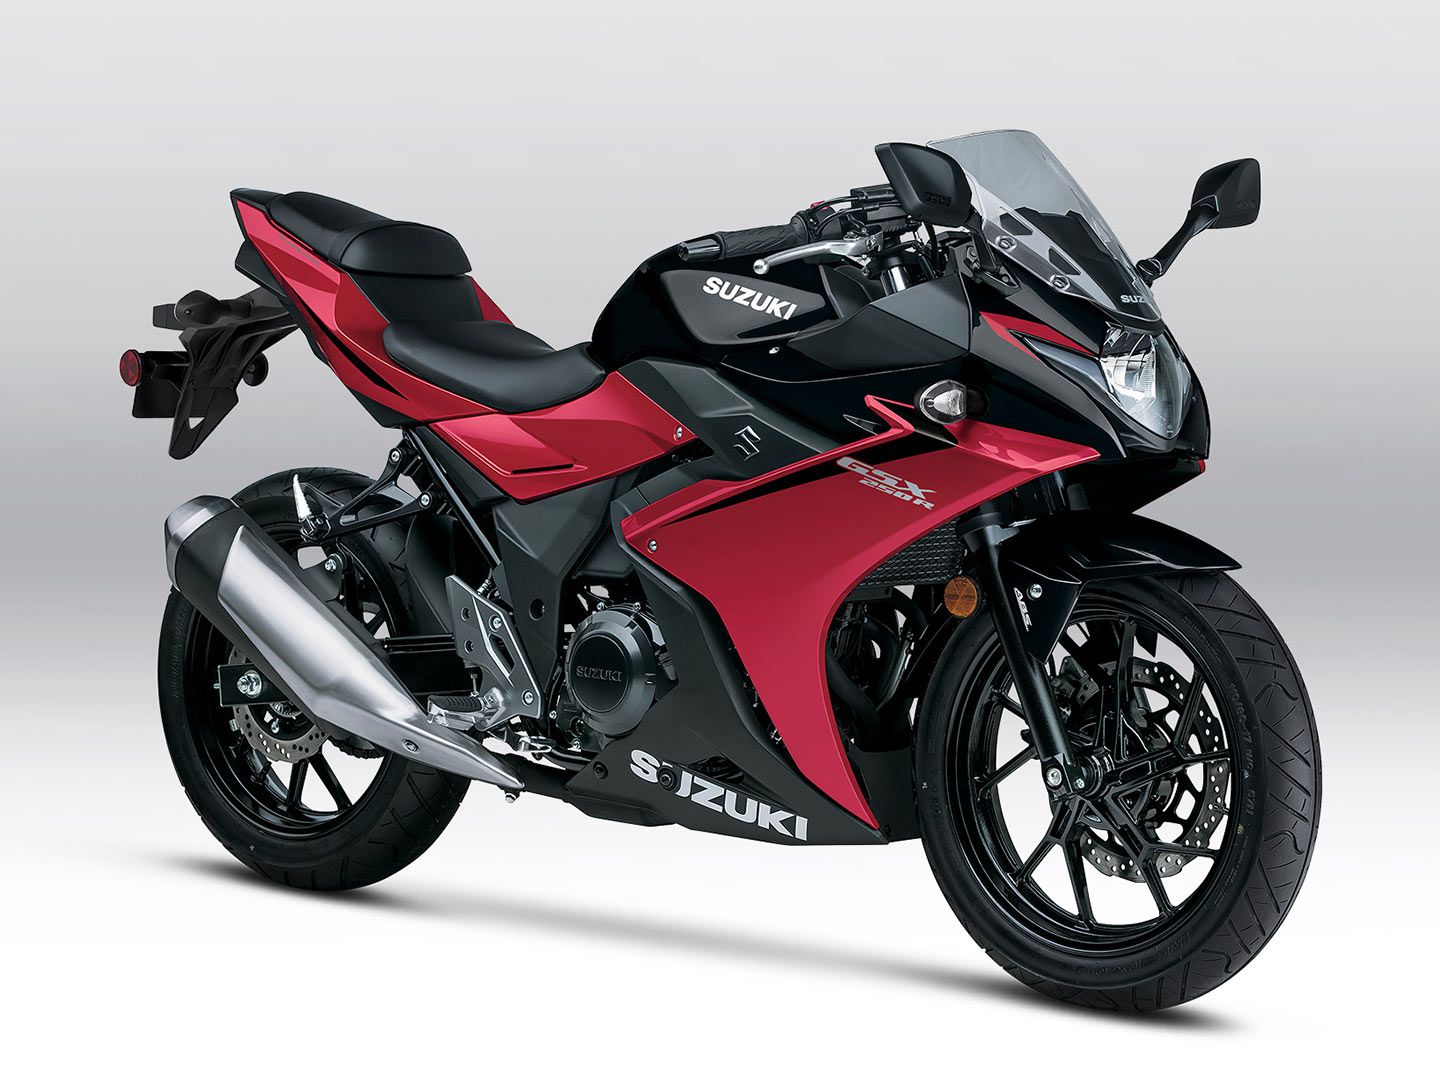 You can buy fast. Or learn how to be it. Welcome to the latter on the 2023 Suzuki GSX250R ABS.